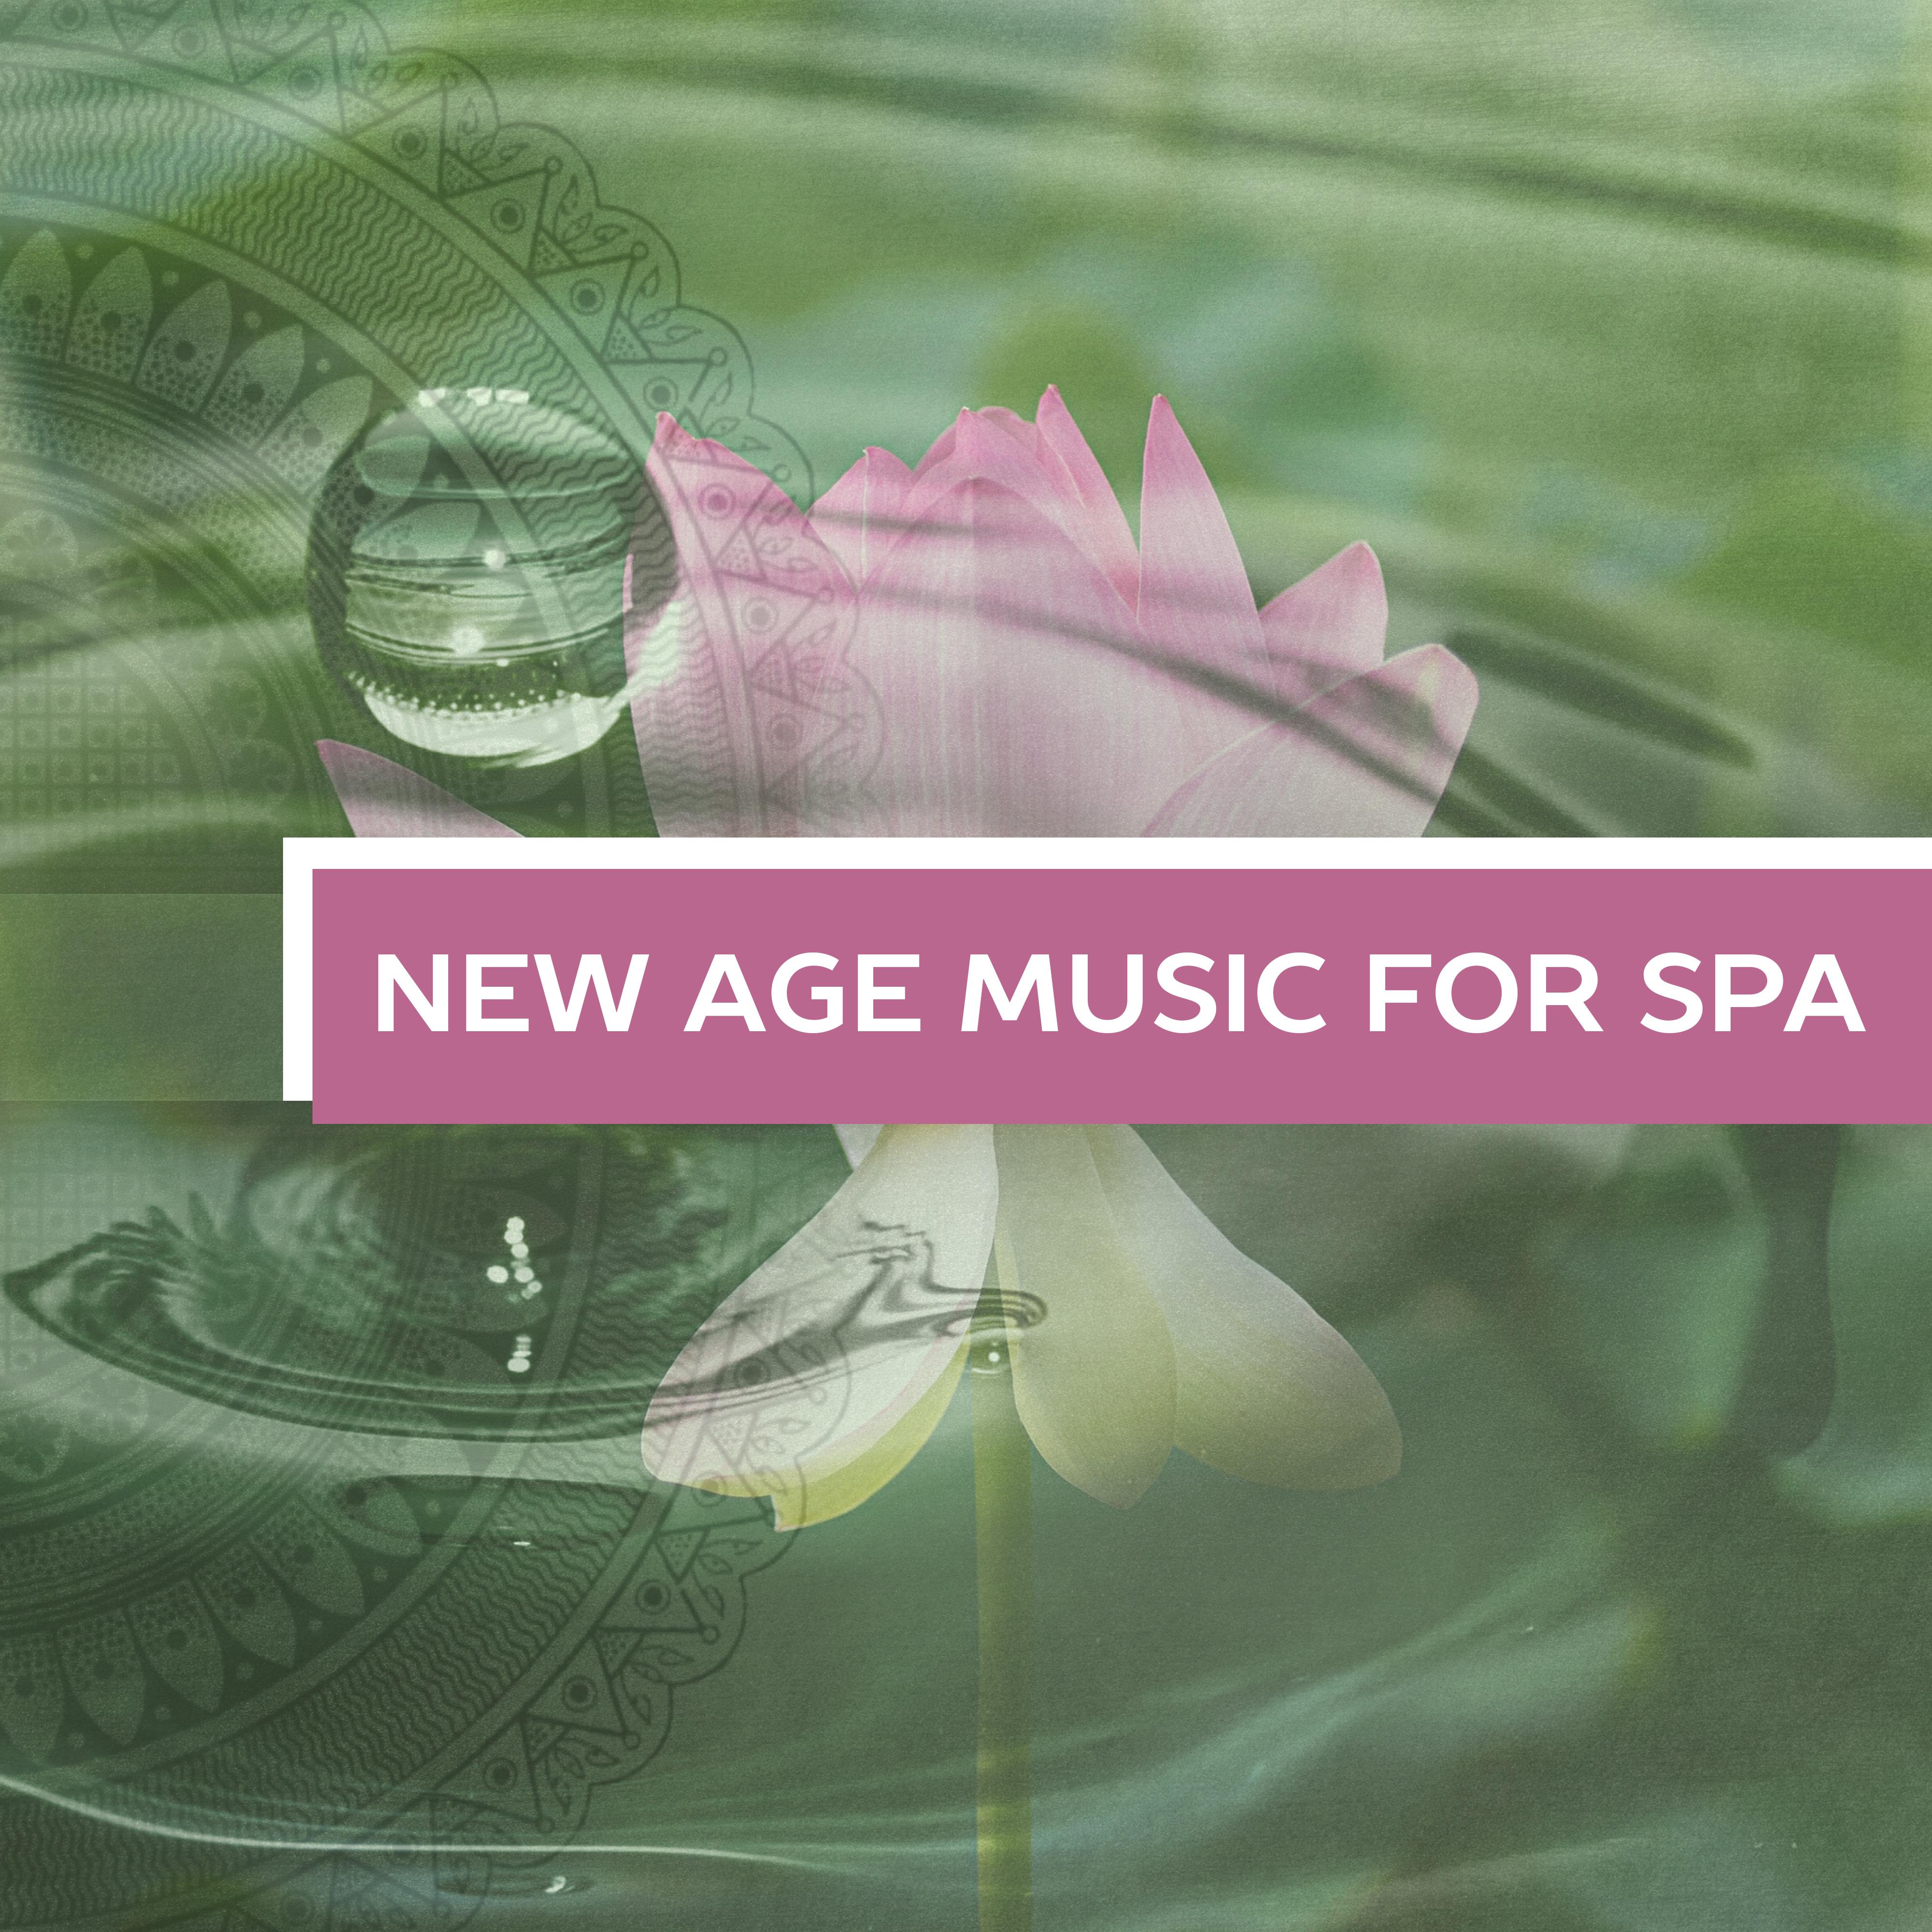 New Age Music for Spa  Stress Free, Pure Relaxation, Spa Dreams, Sensual Massage, Relaxation Wellness, Nature Sounds, Spa Music